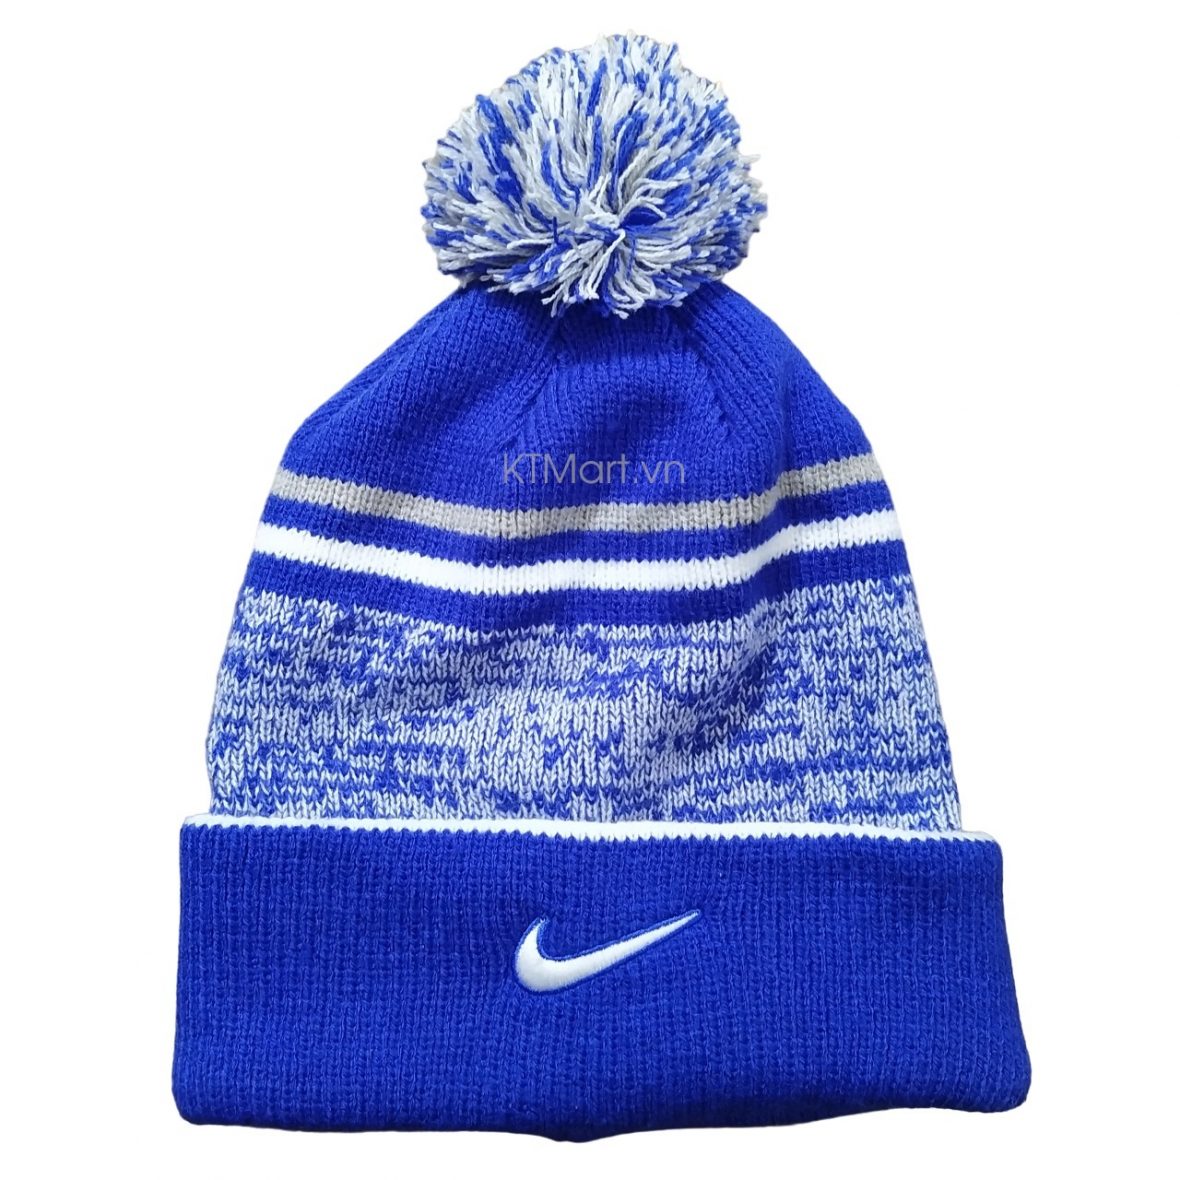 Mũ len Nike Unisex Adult The Valley Removable Pom Knit 2-in-1 Beanie Hat